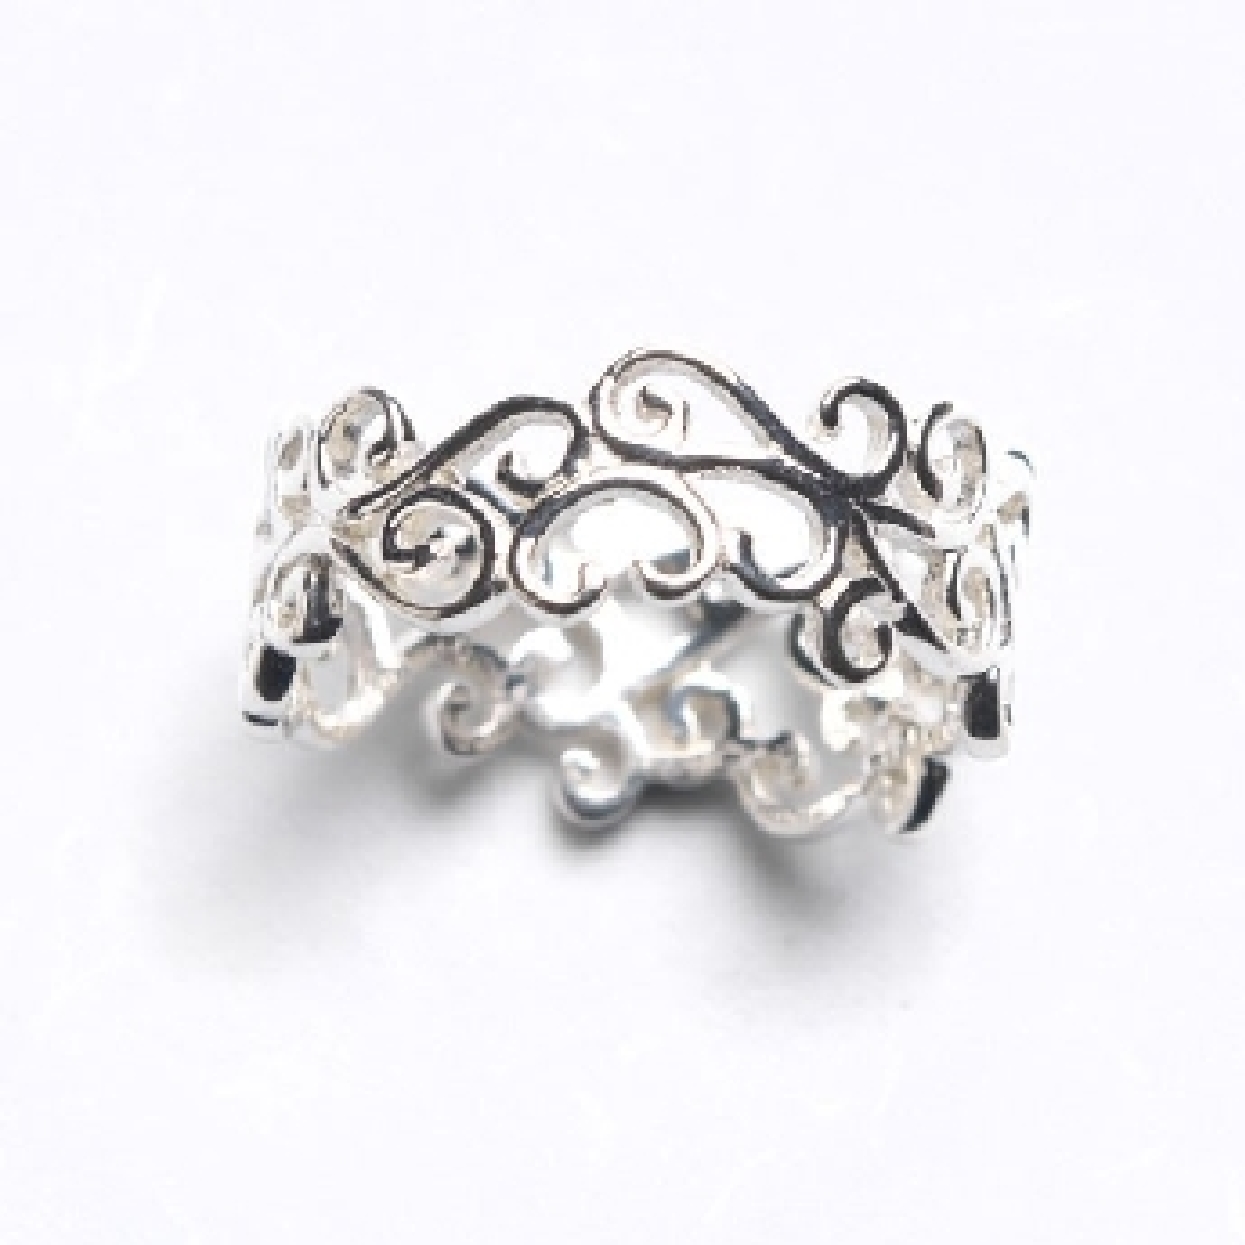 Sterling silver Courtyard Scroll Ring
from the Southern Gates® Courtyard Series. Size 7. R155/7